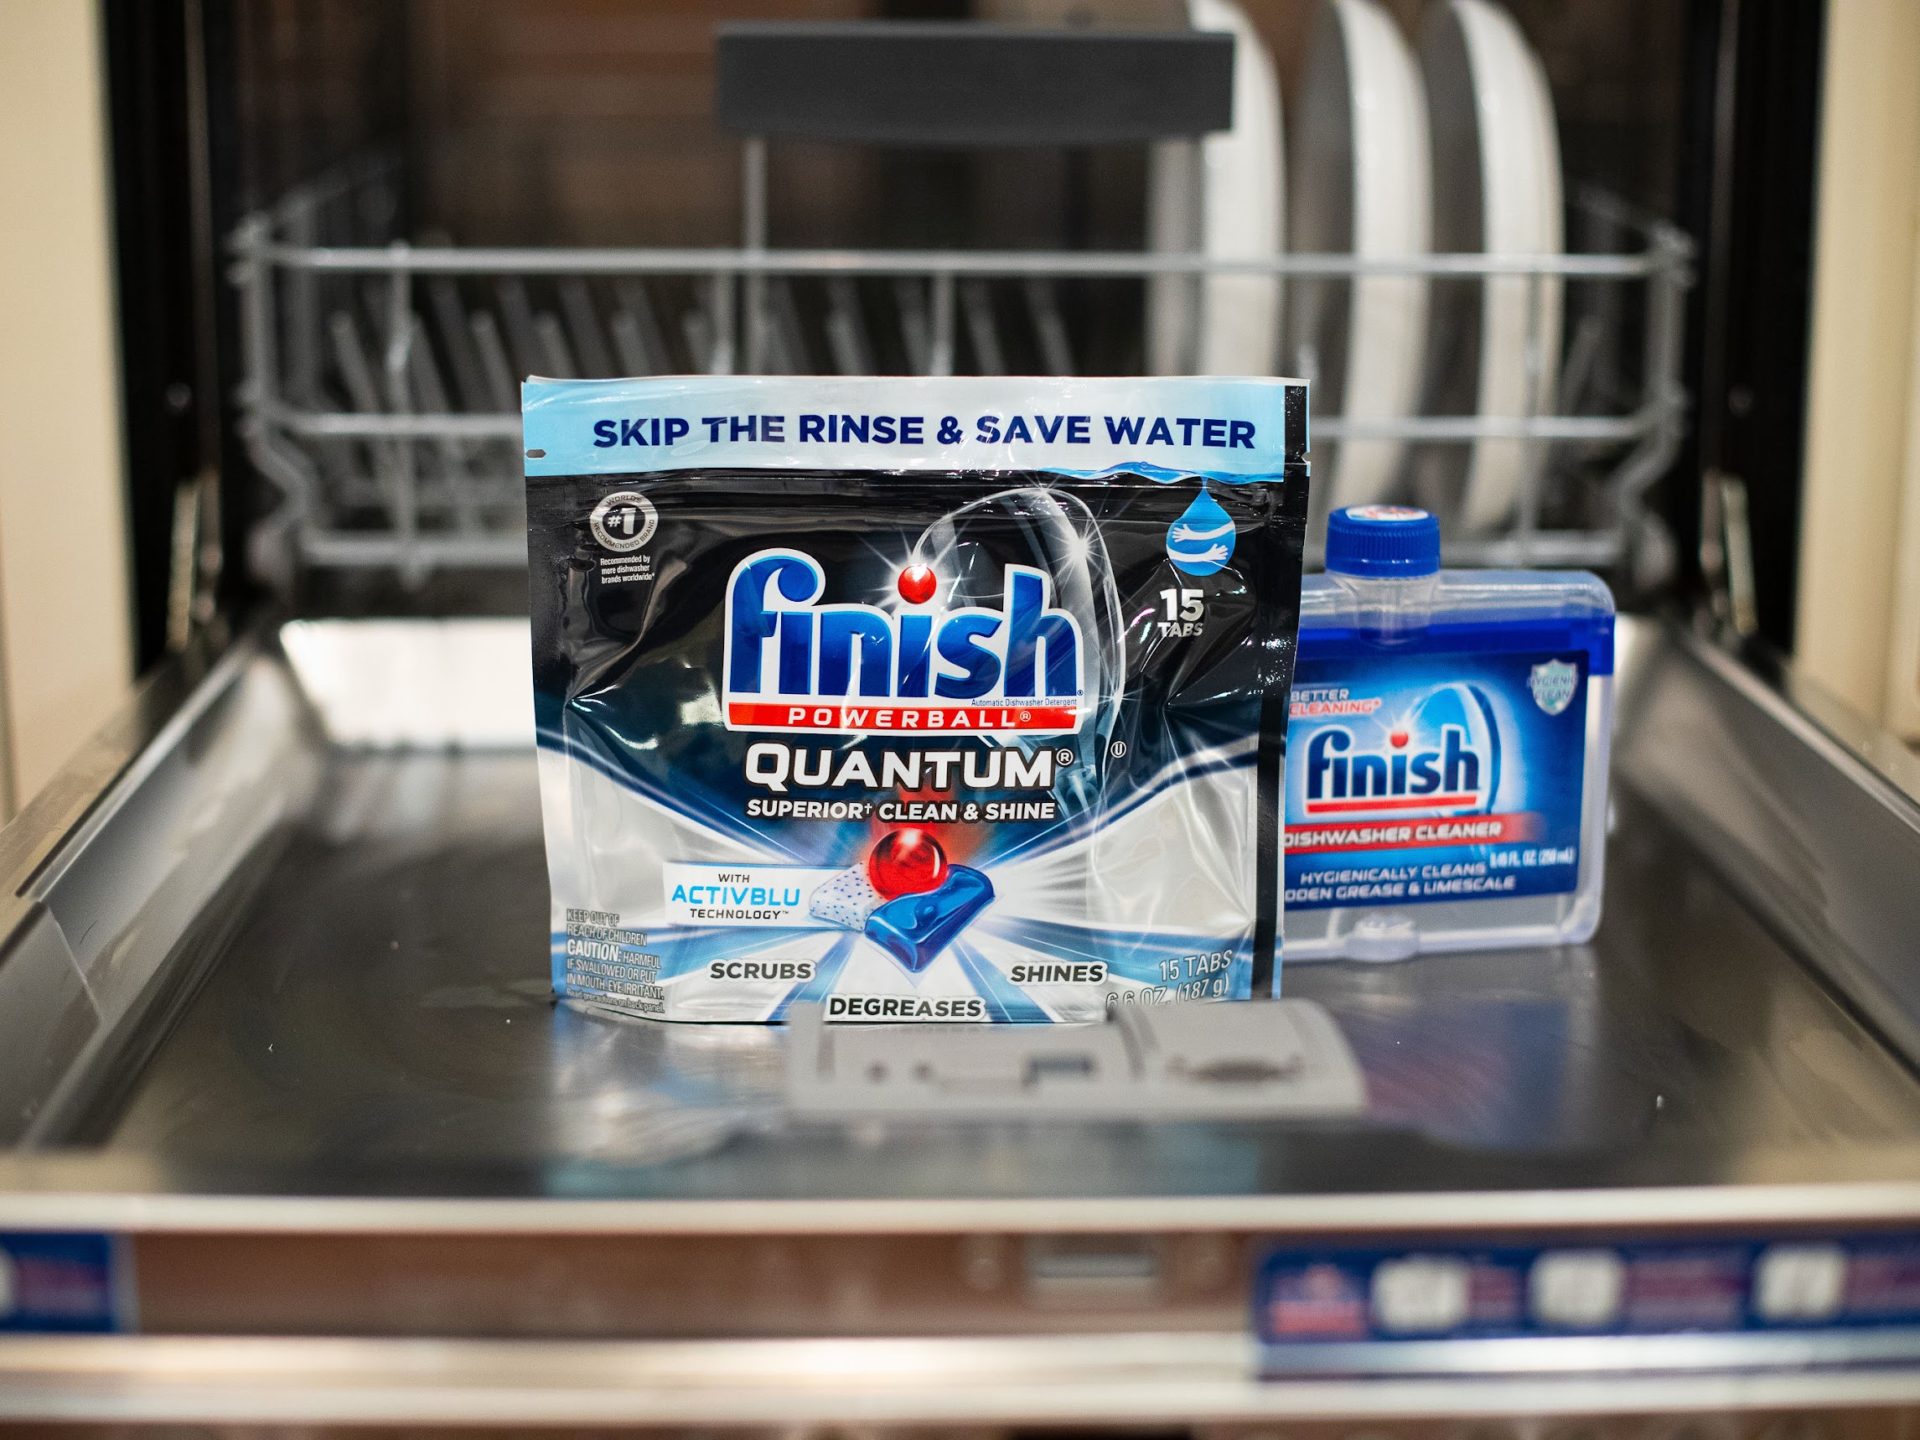 Finish Quantum Detergent 37-Count As Low As $4.99 At Kroger (Regular Price $10.99)